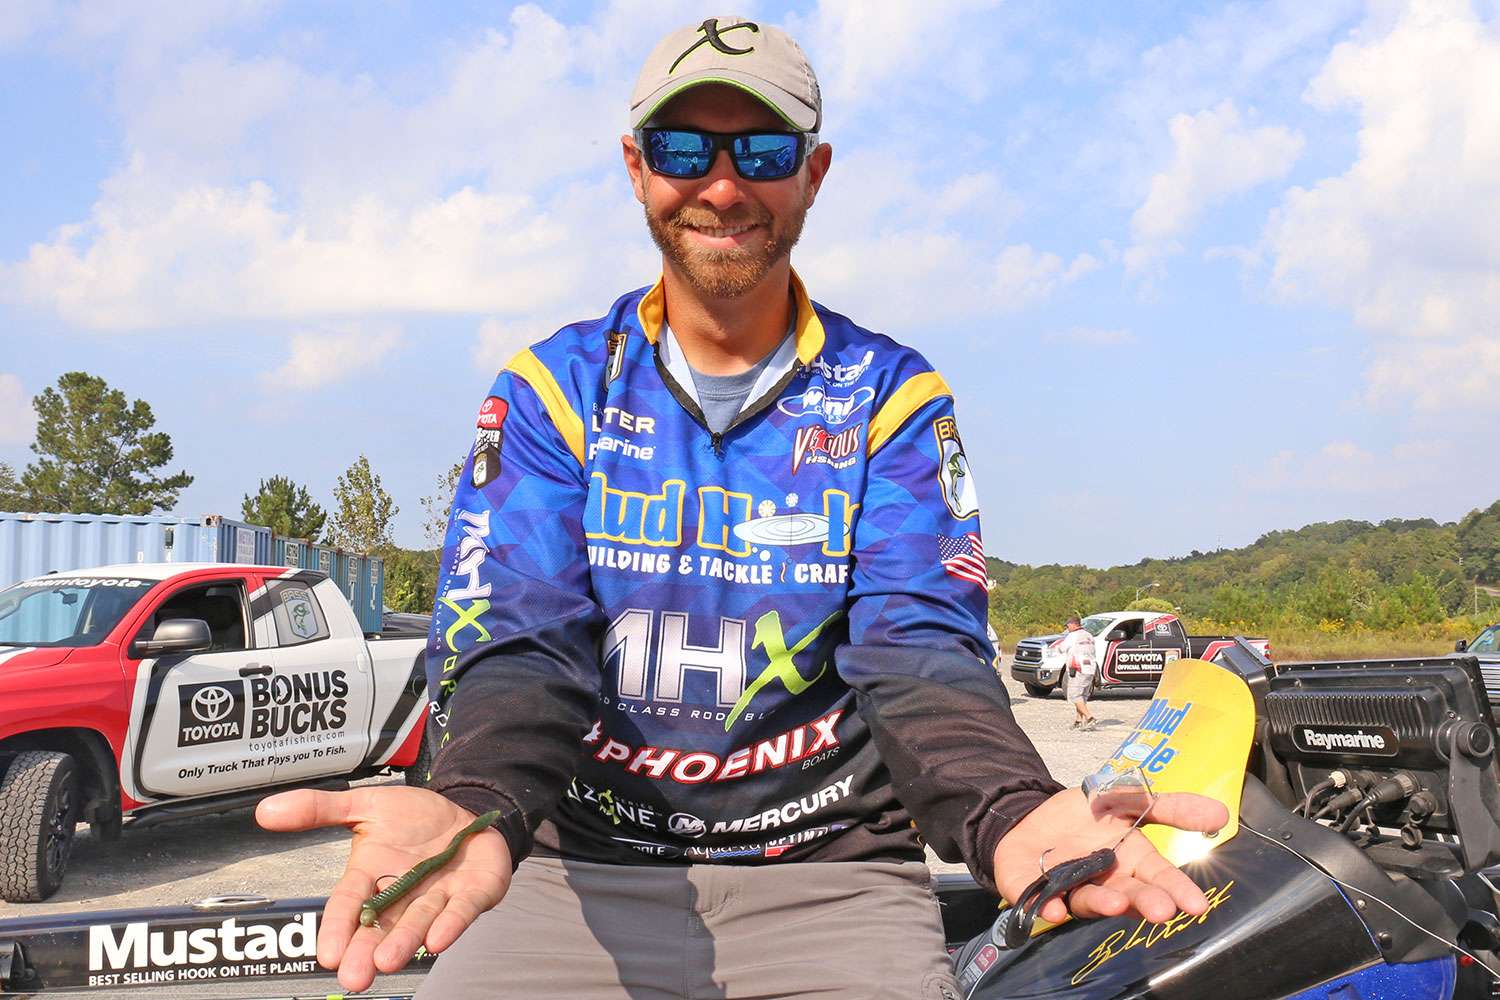 <p><b>Brandon Lester</b></p>
Brandon Lester worked both ends of the water column with a buzzbait and shaky head rig to finish third. 
